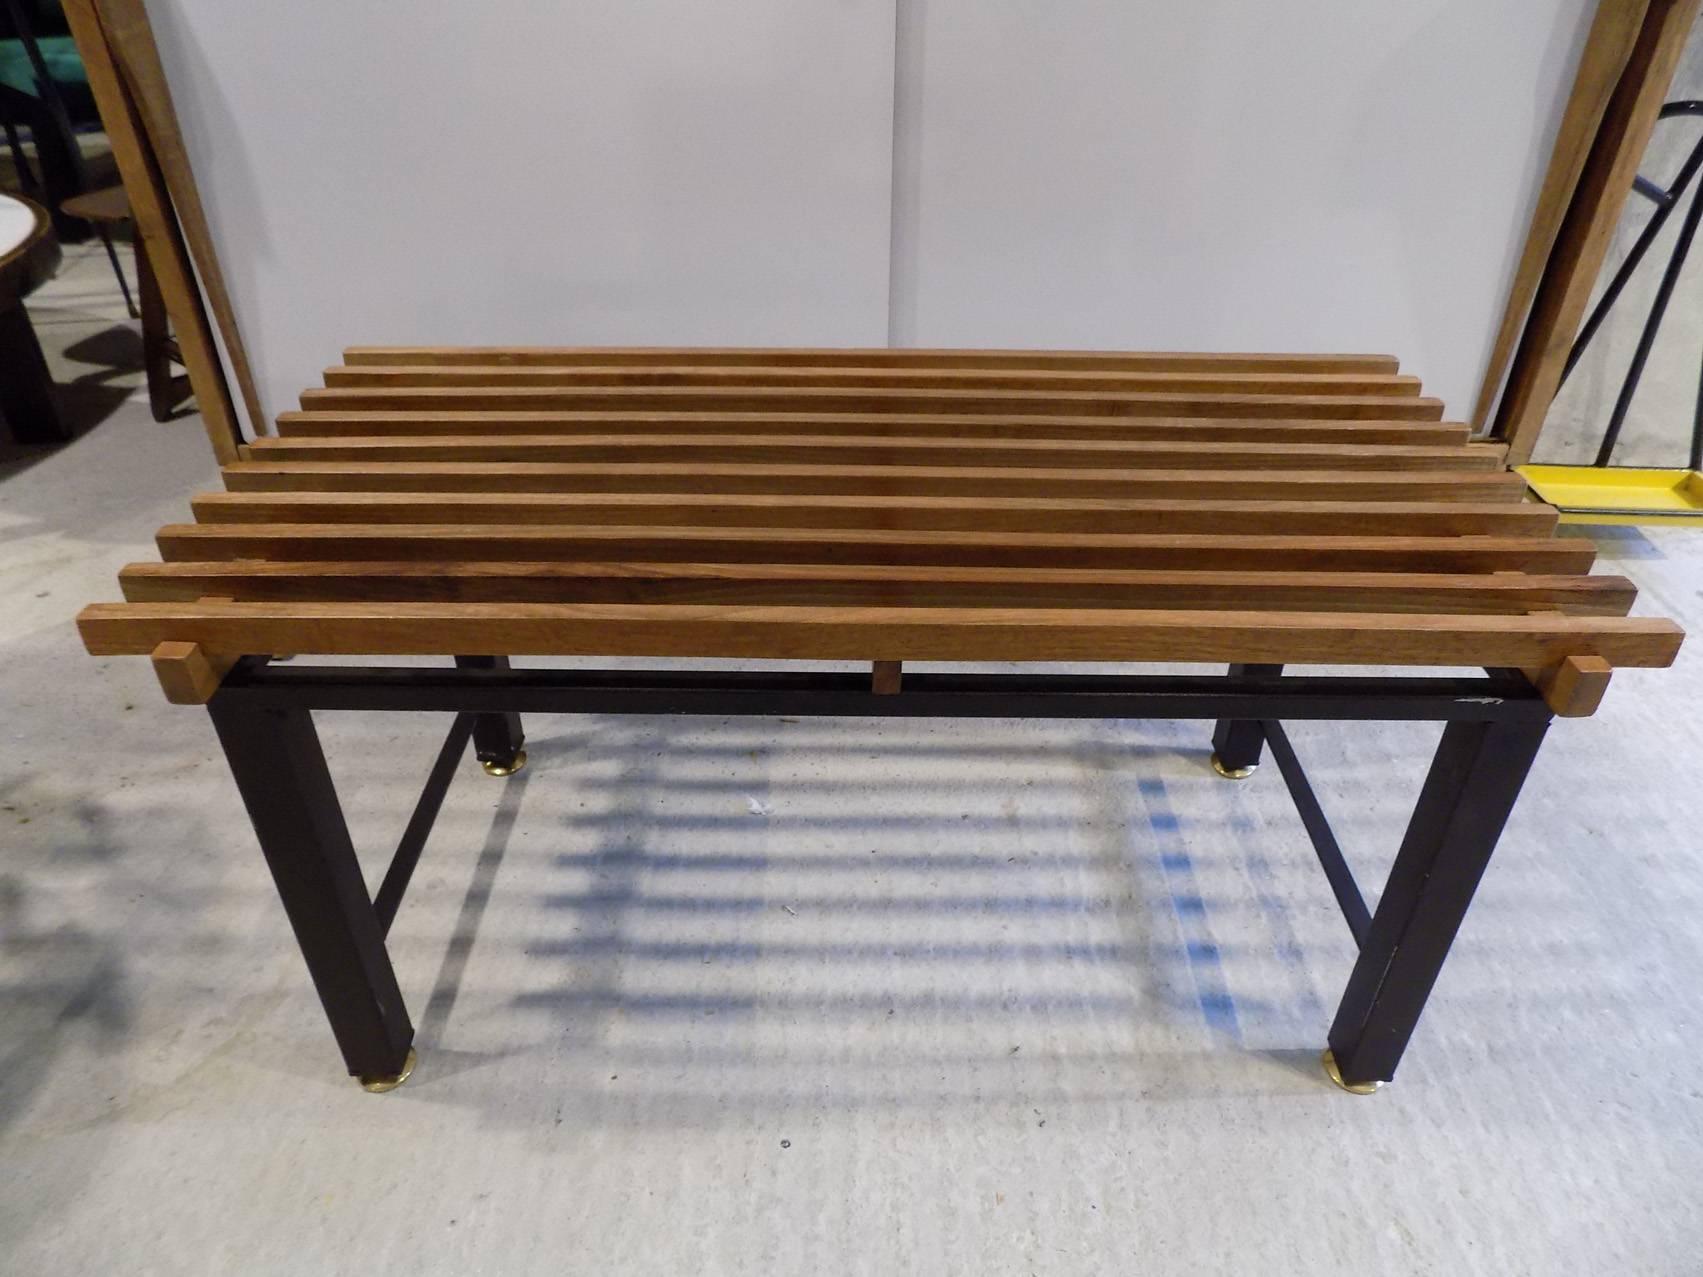 Beautiful Pair of Italian Benches, wood metal and brass. Excellent condition.